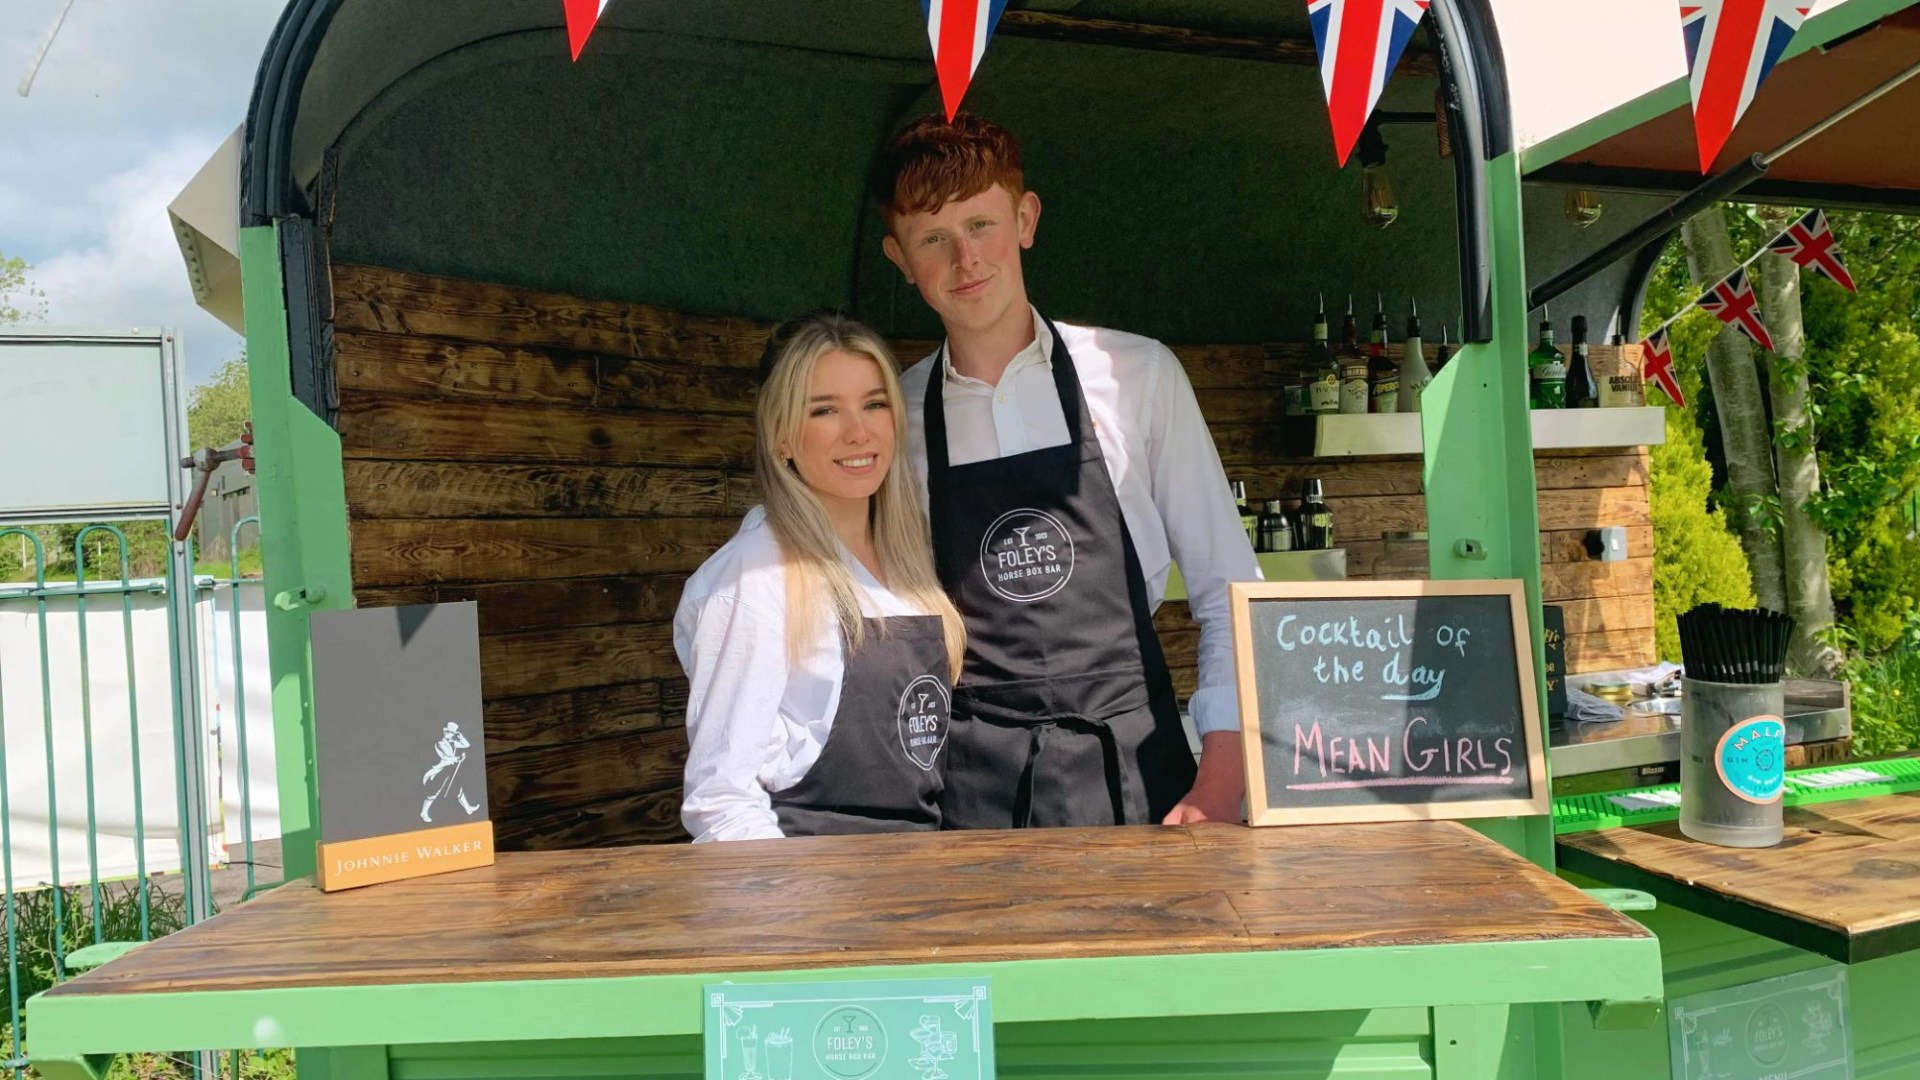 I’m a teacher, 23 & transformed an 800 horsebox into a bar business with DIY, I do weddings on weekends for extra cash [Video]